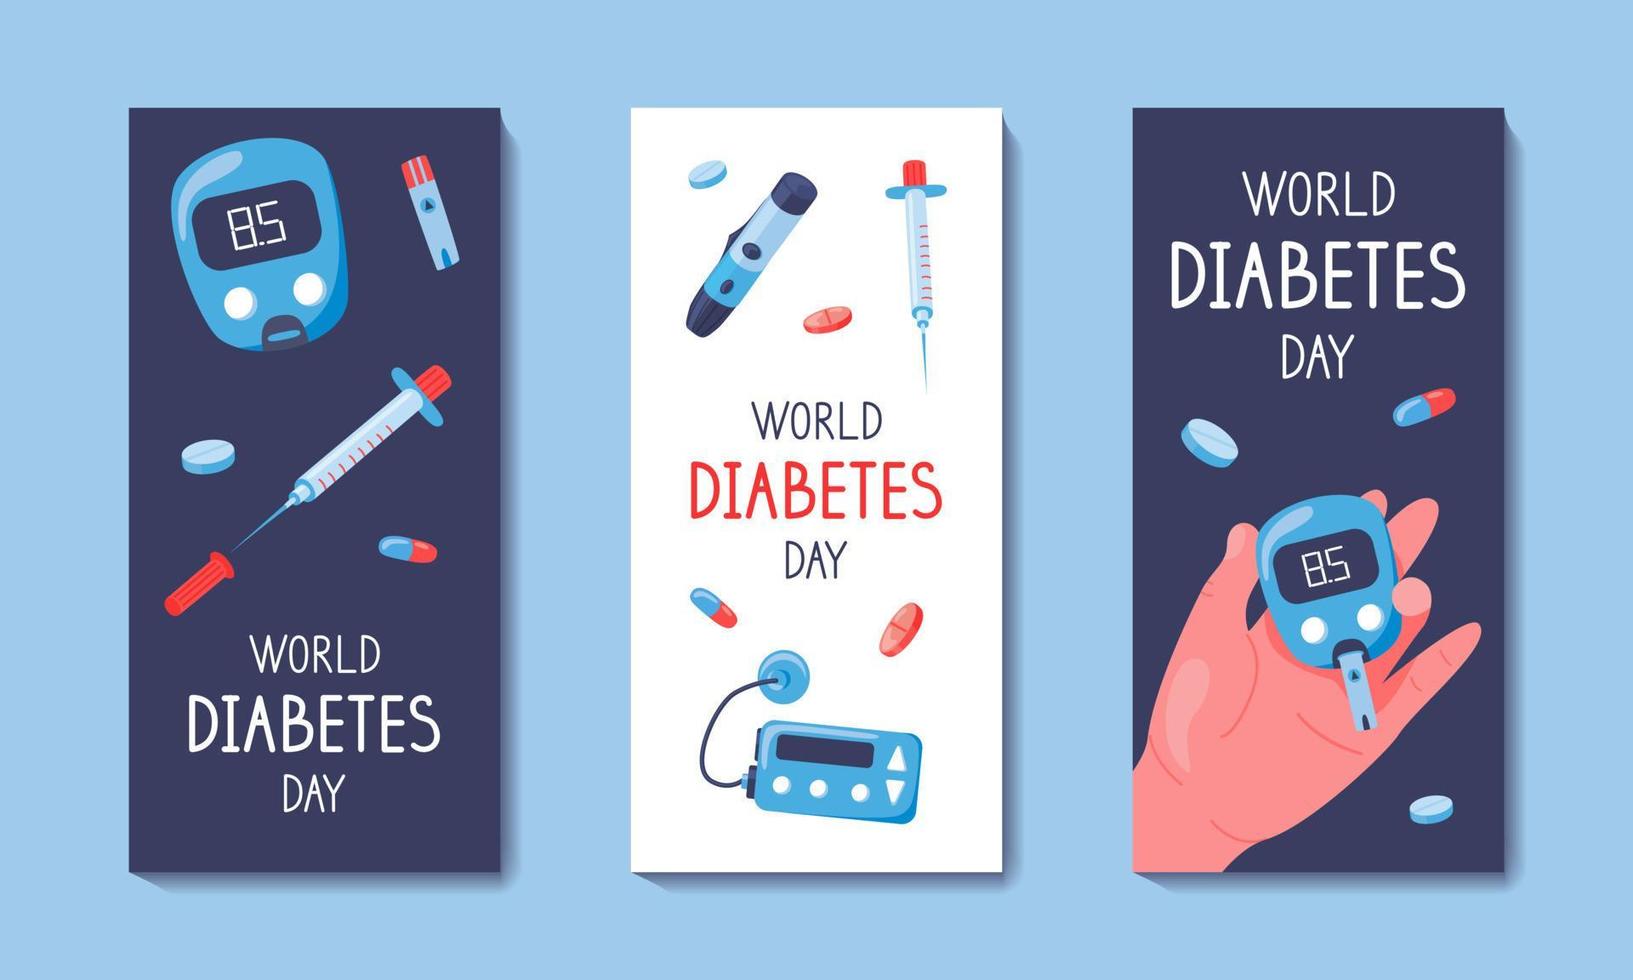 World diabetes day vertical banner template. Hand drawn vector illustration for awareness about mellitus.